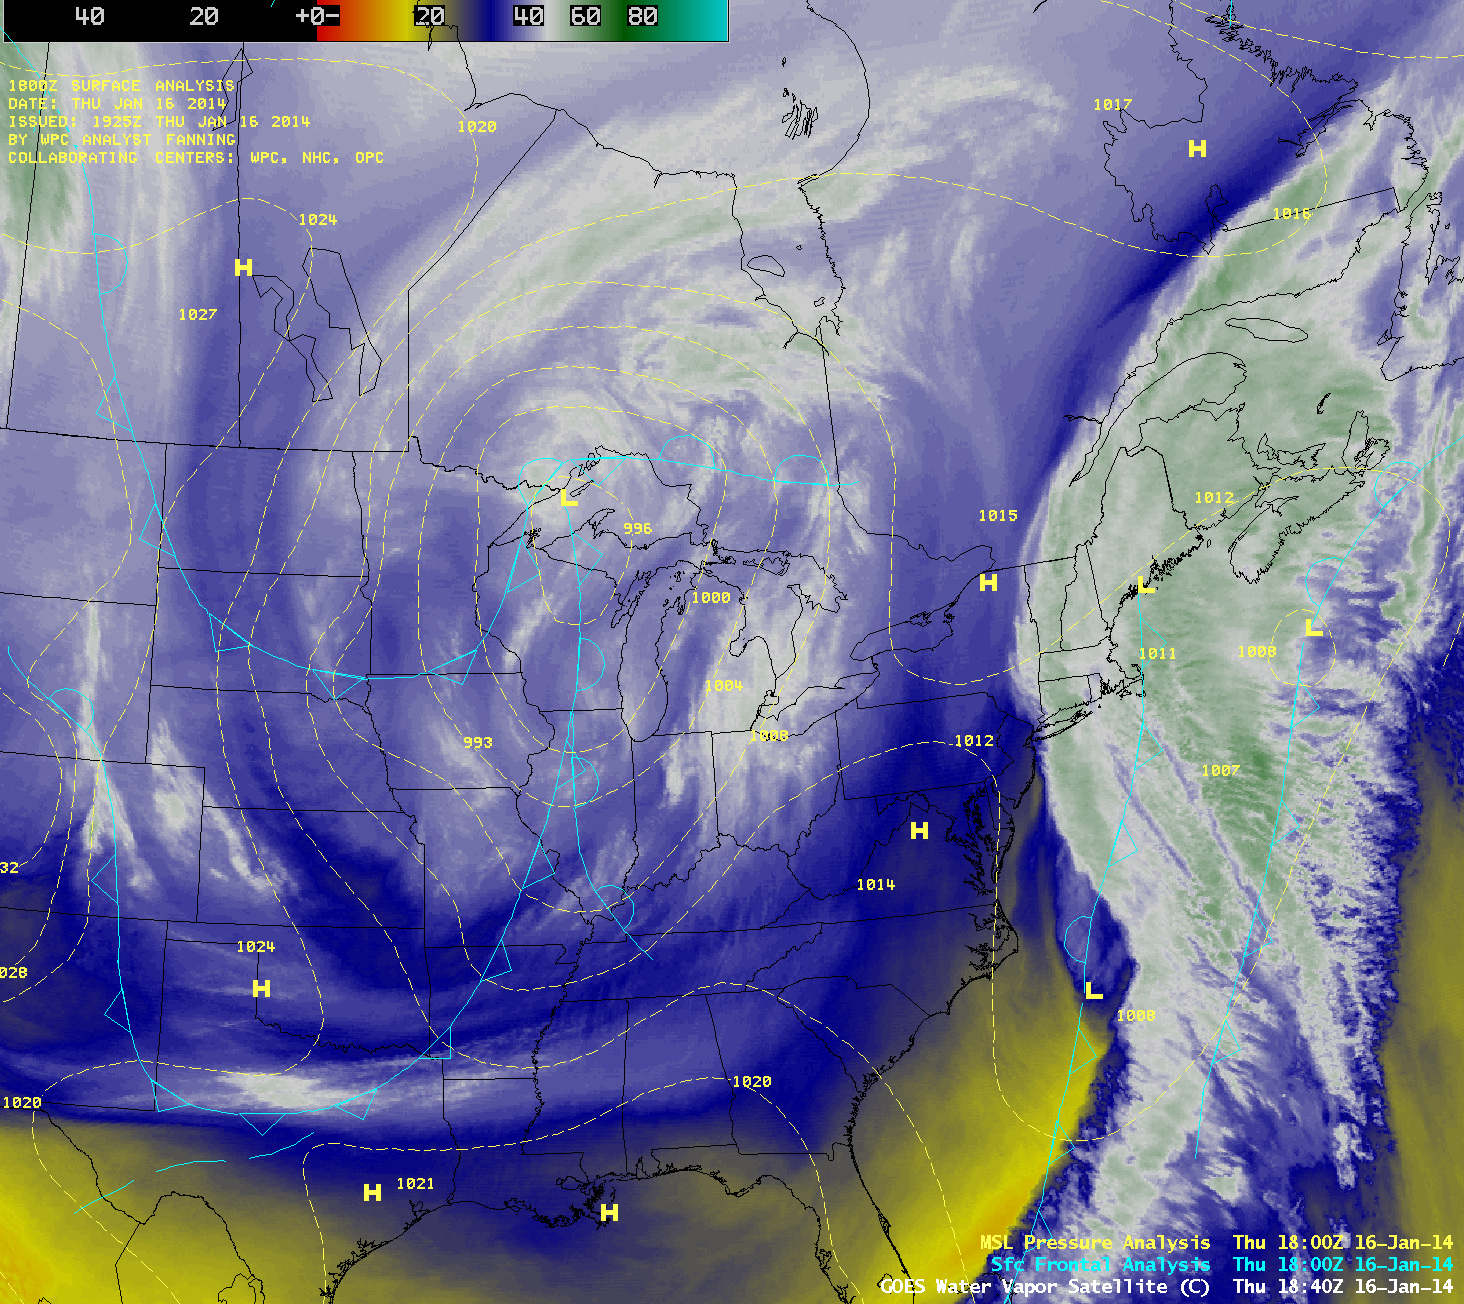 GOES-13 6.5 Âµm water vapor channel images [click to play animation]